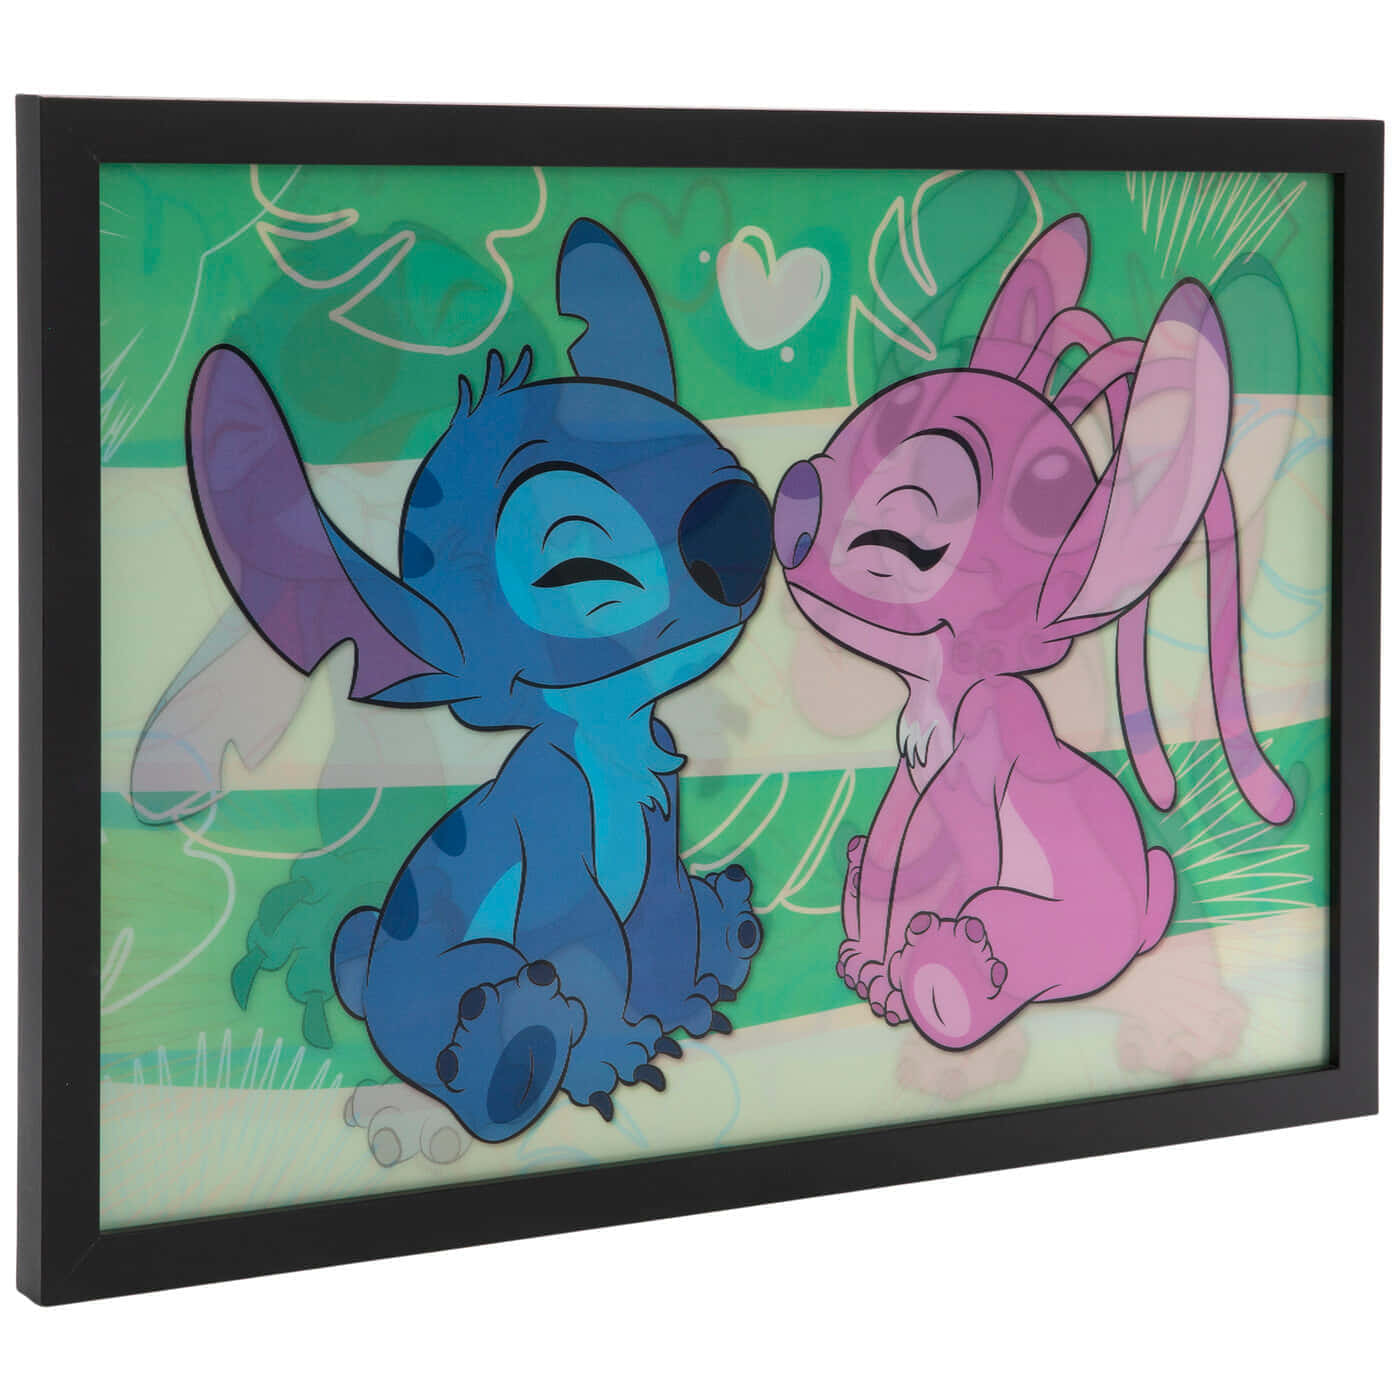 Cute Stitch And Angel Framed Photo Wallpaper